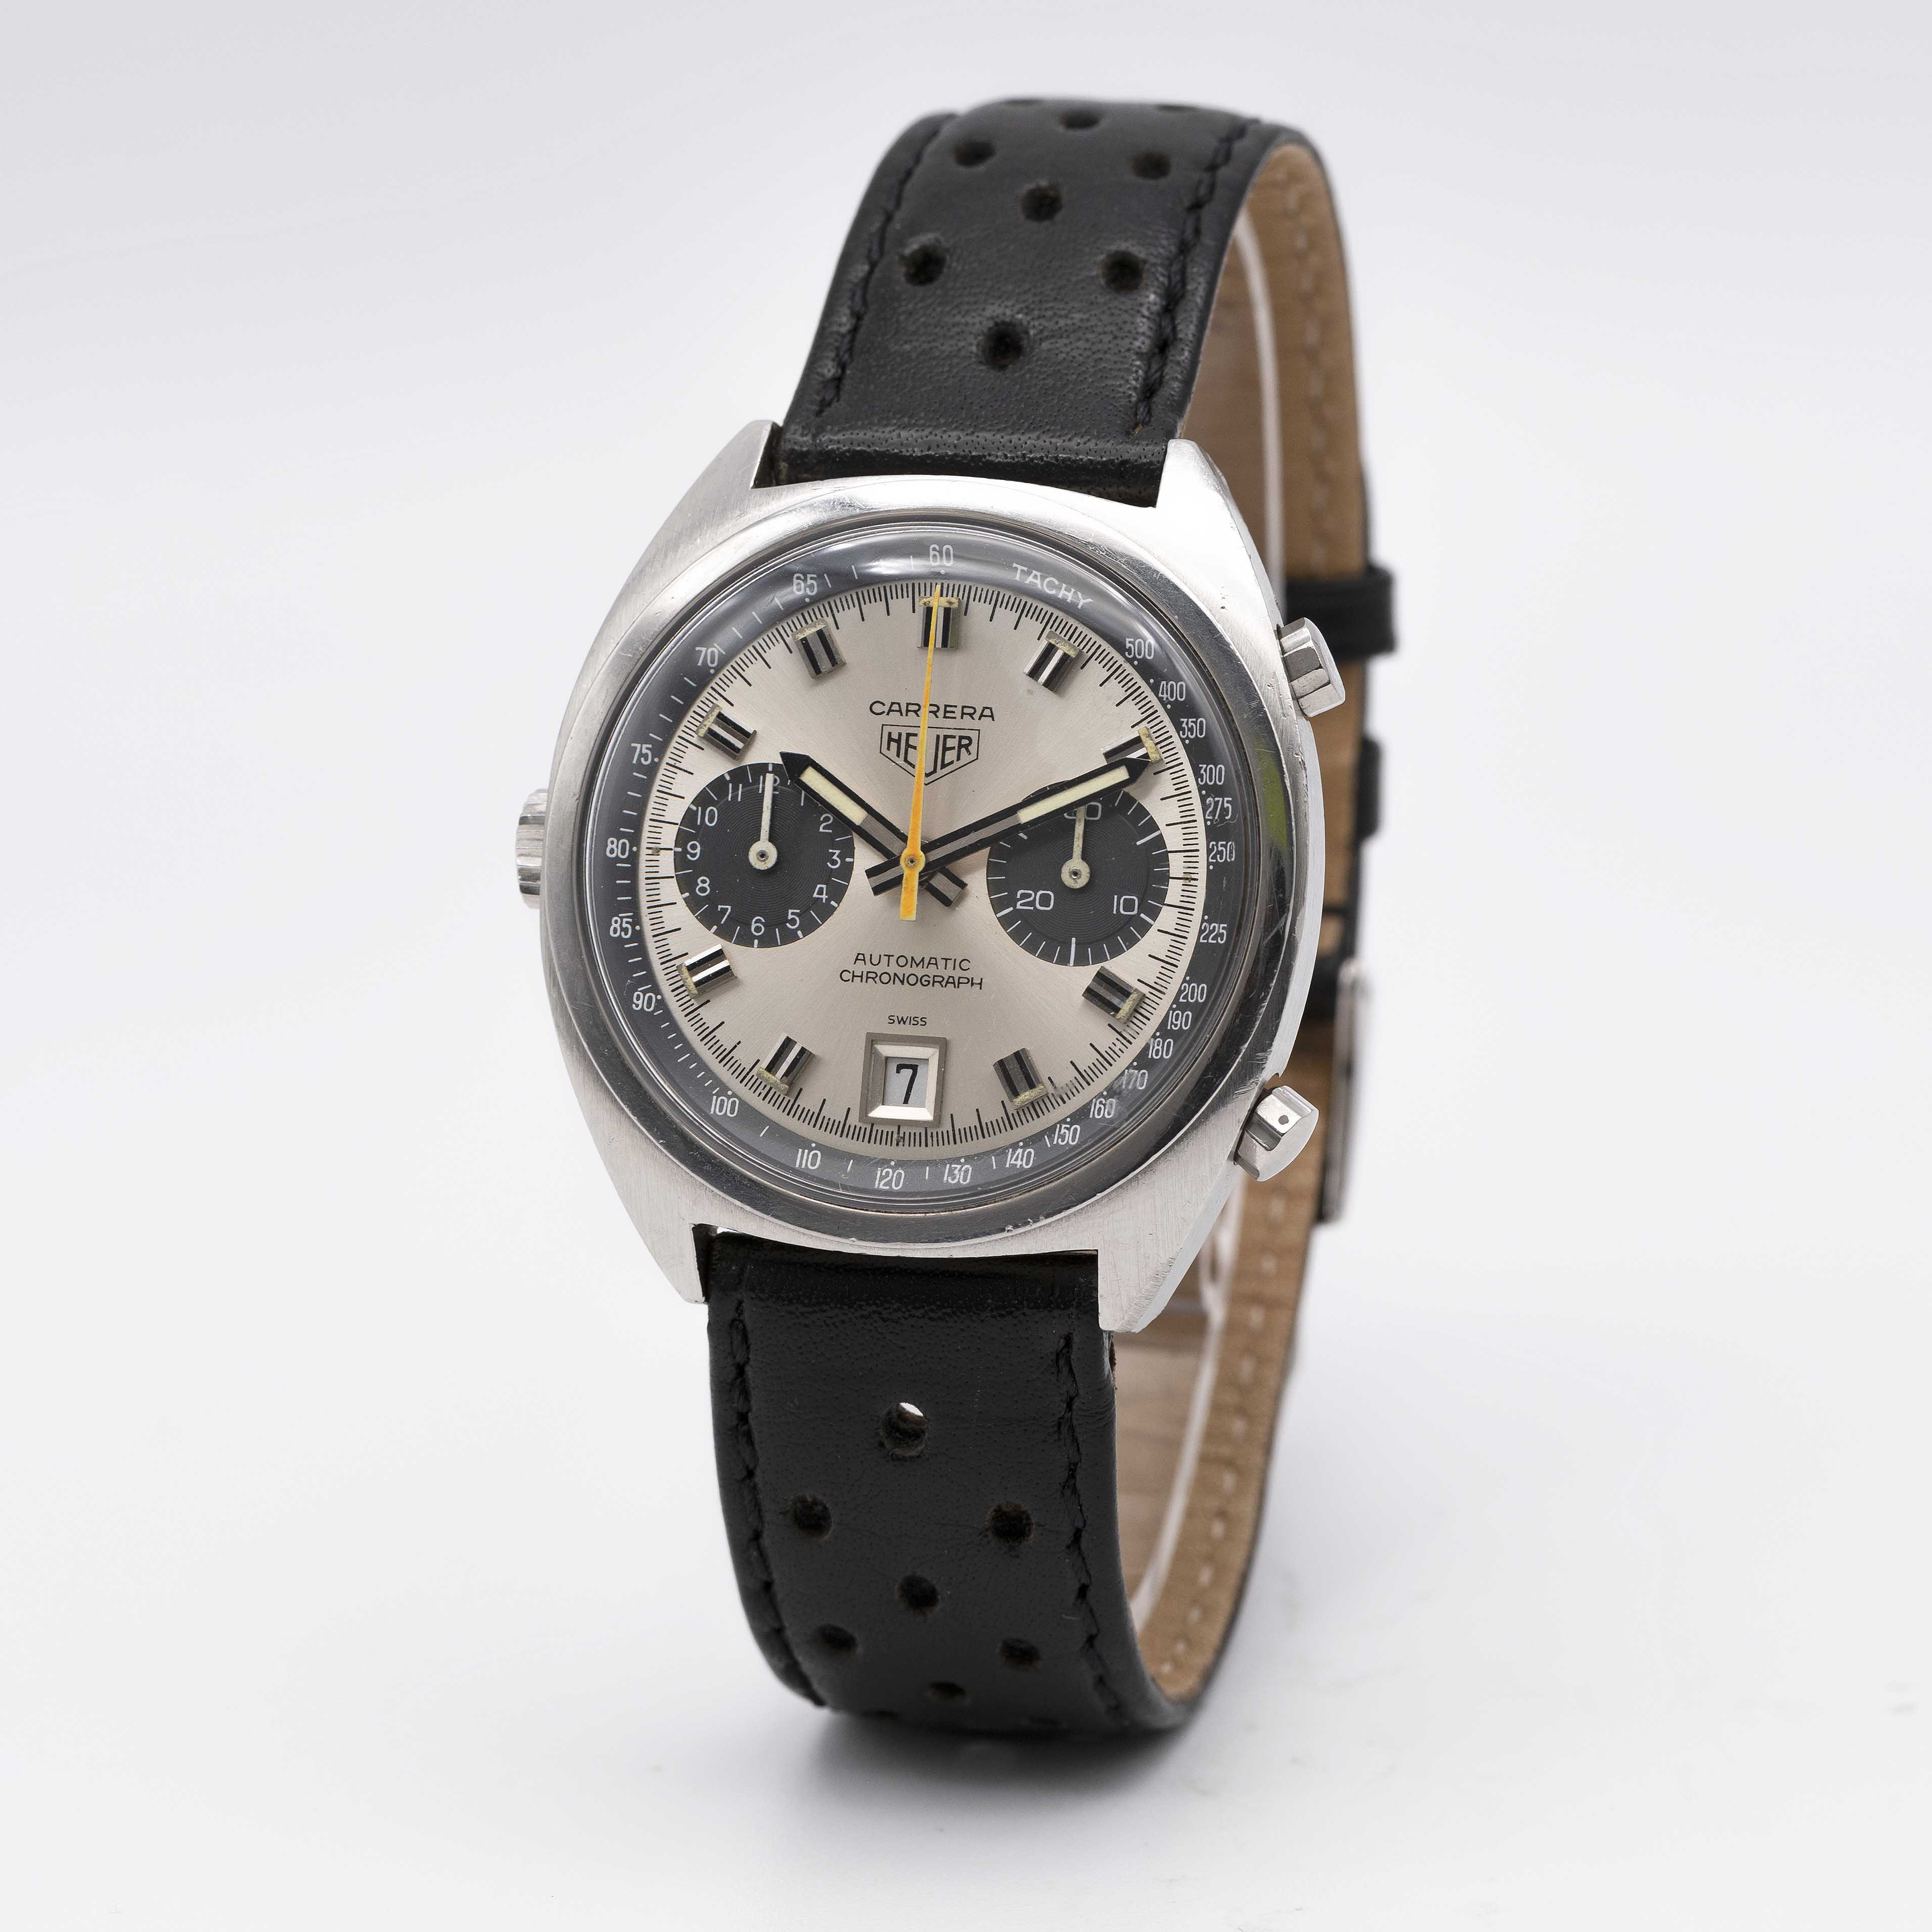 A GENTLEMAN'S STAINLESS STEEL HEUER CARRERA AUTOMATIC CHRONOGRAPH WRIST WATCH CIRCA 1970s, REF. 1153 - Image 3 of 9